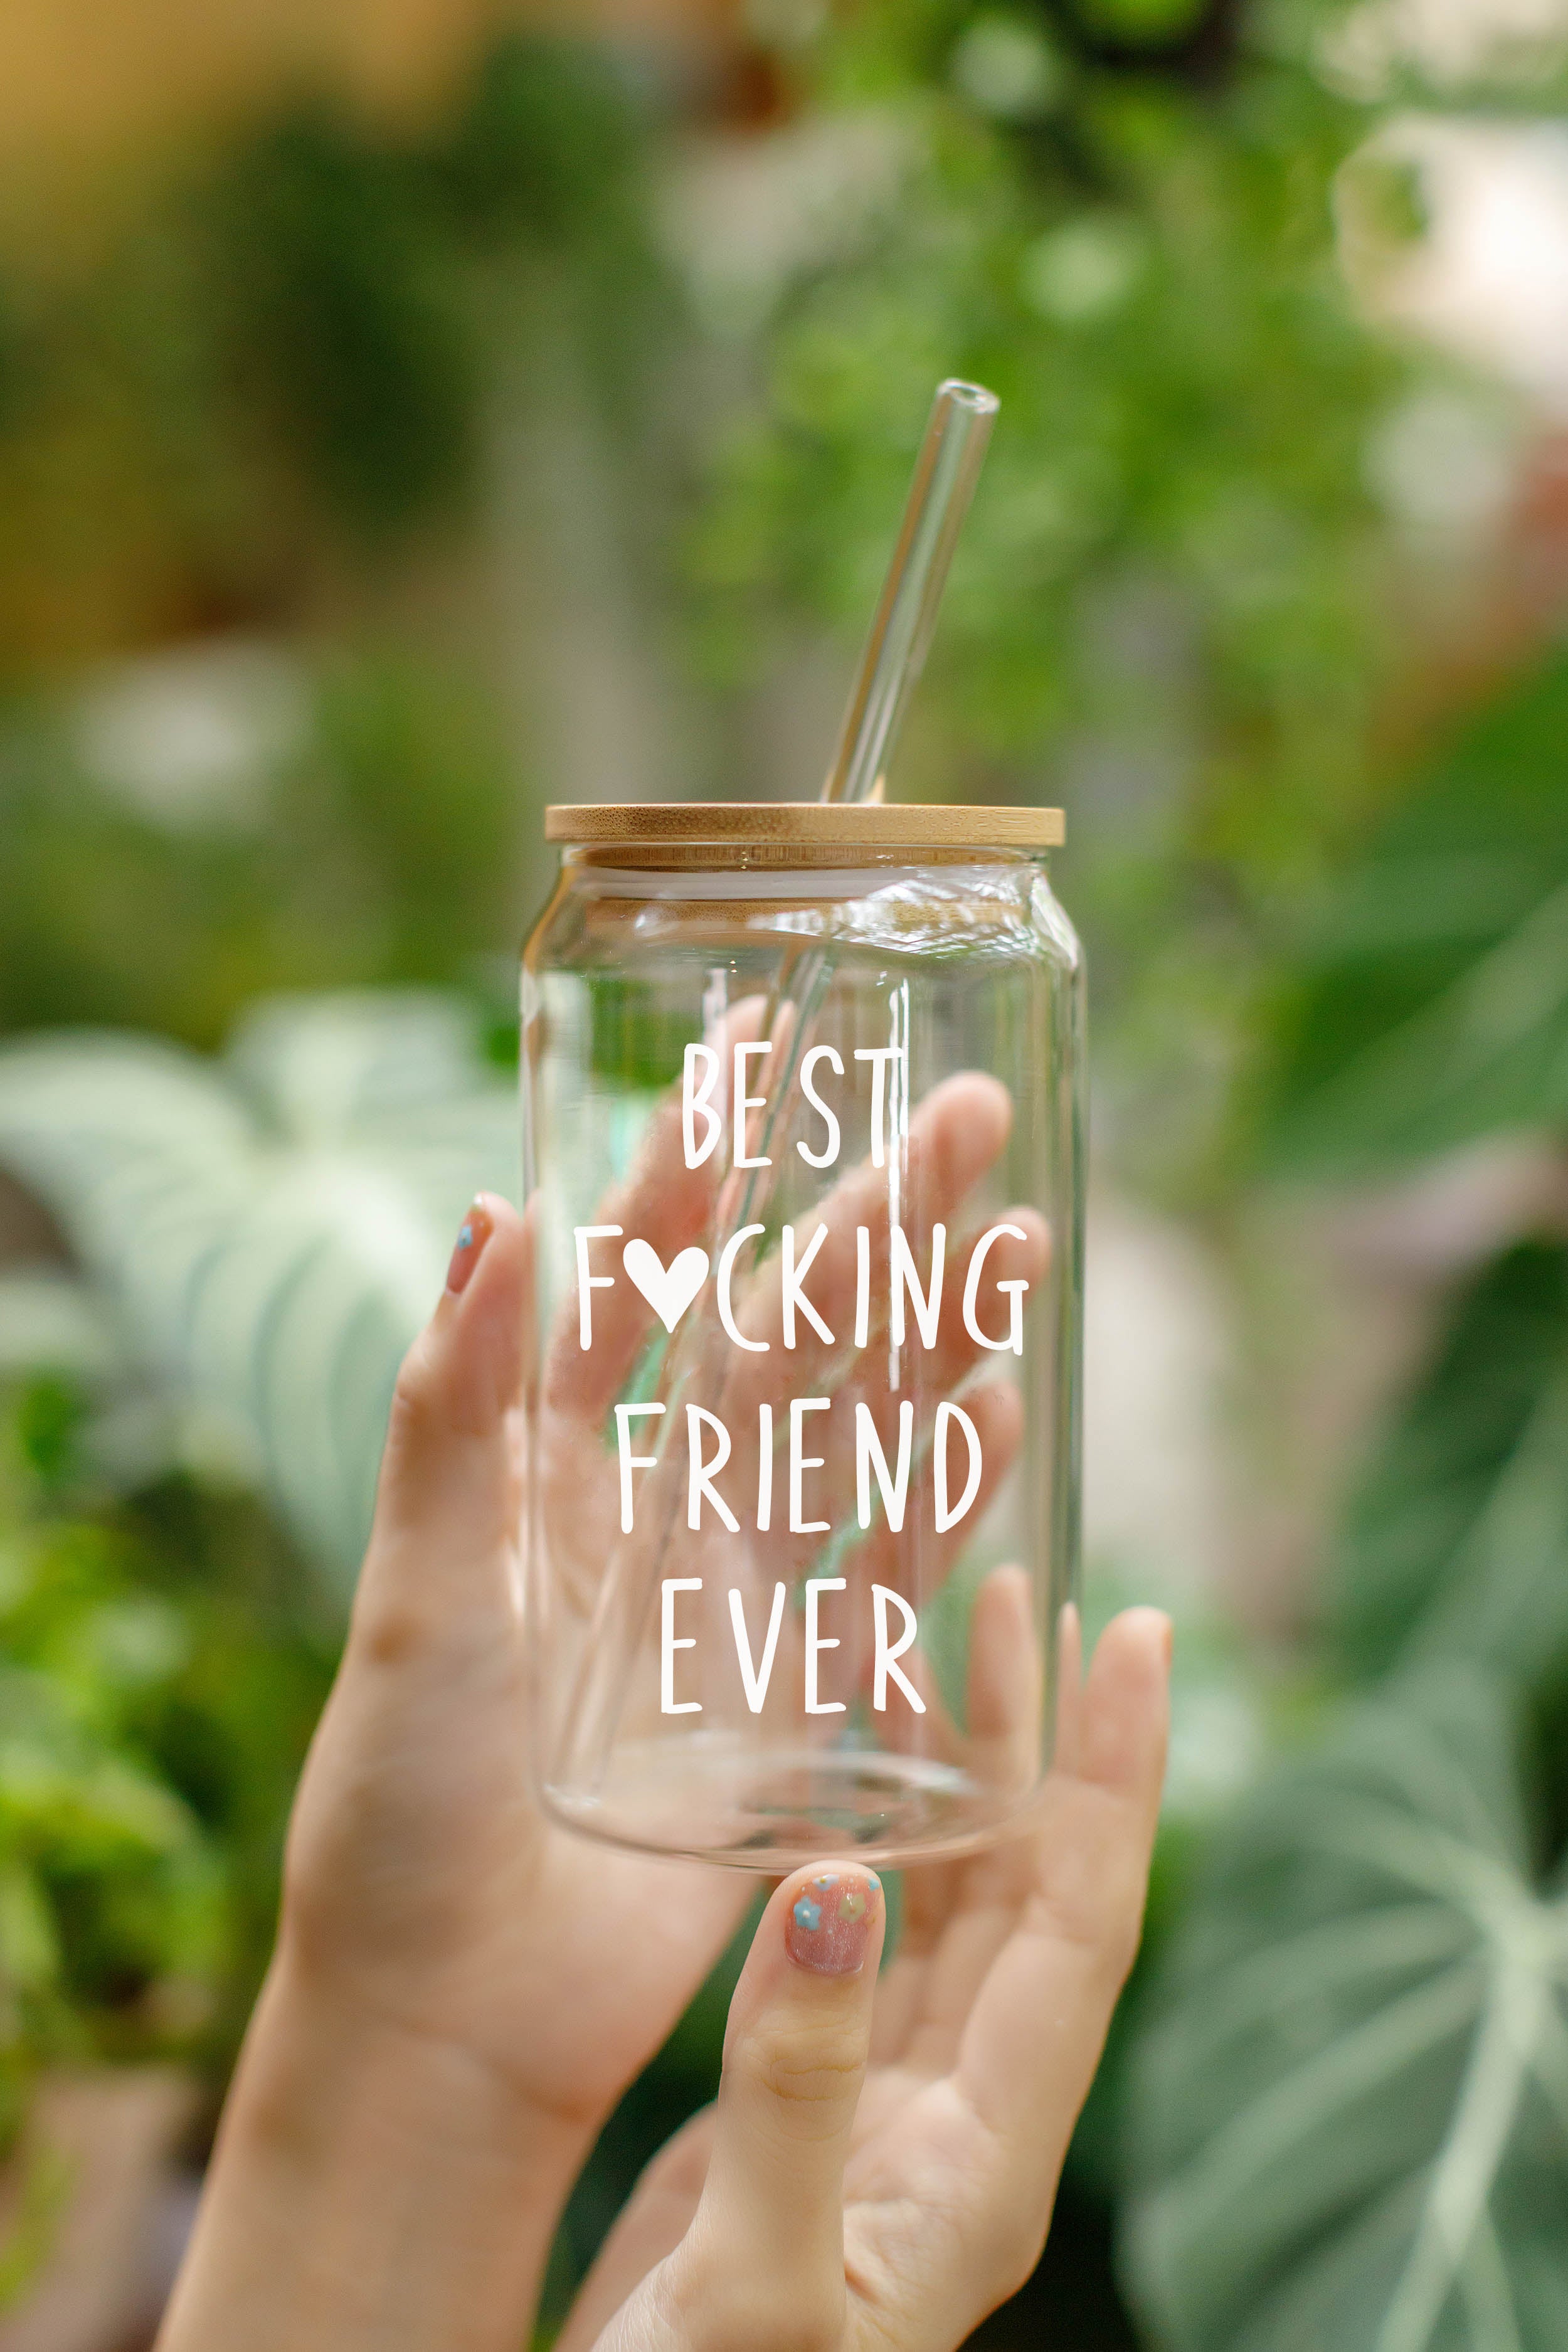 Iced Coffee Glass Cup w/Lid & Straw - Christmas BFF Gifts, Friendship Gifts